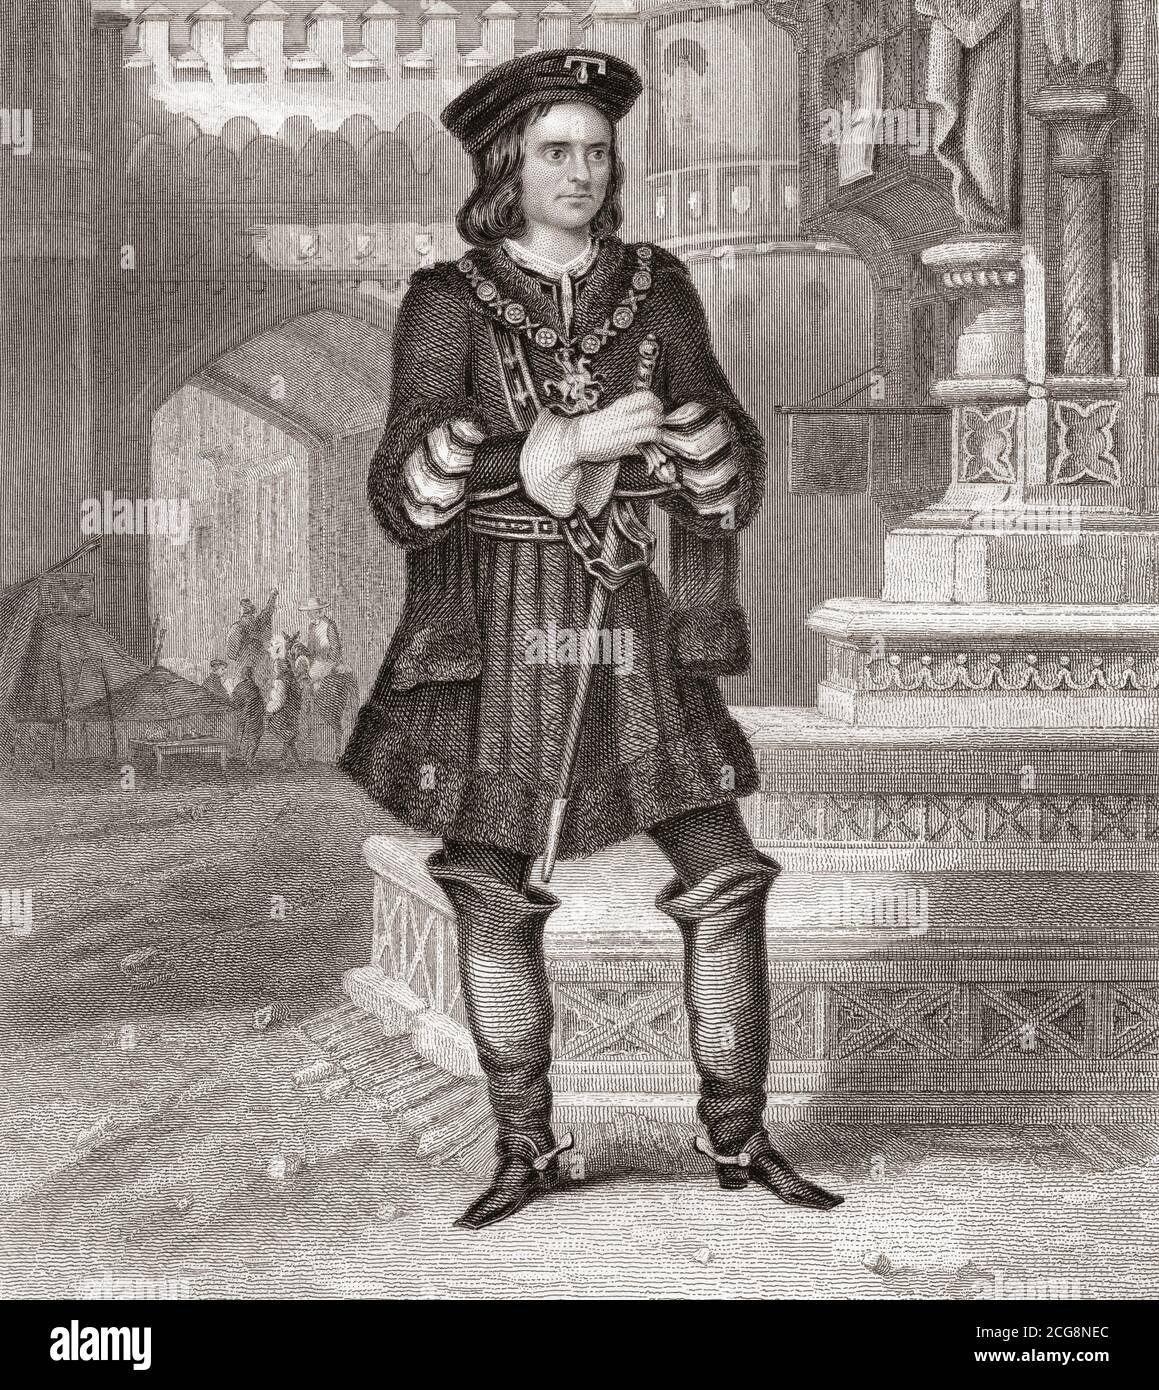 Charles Kean in the role of Gloucester from Shakespeare's play Richard III.  Charles John Kean,  1811 - 1868. English actor. Stock Photo